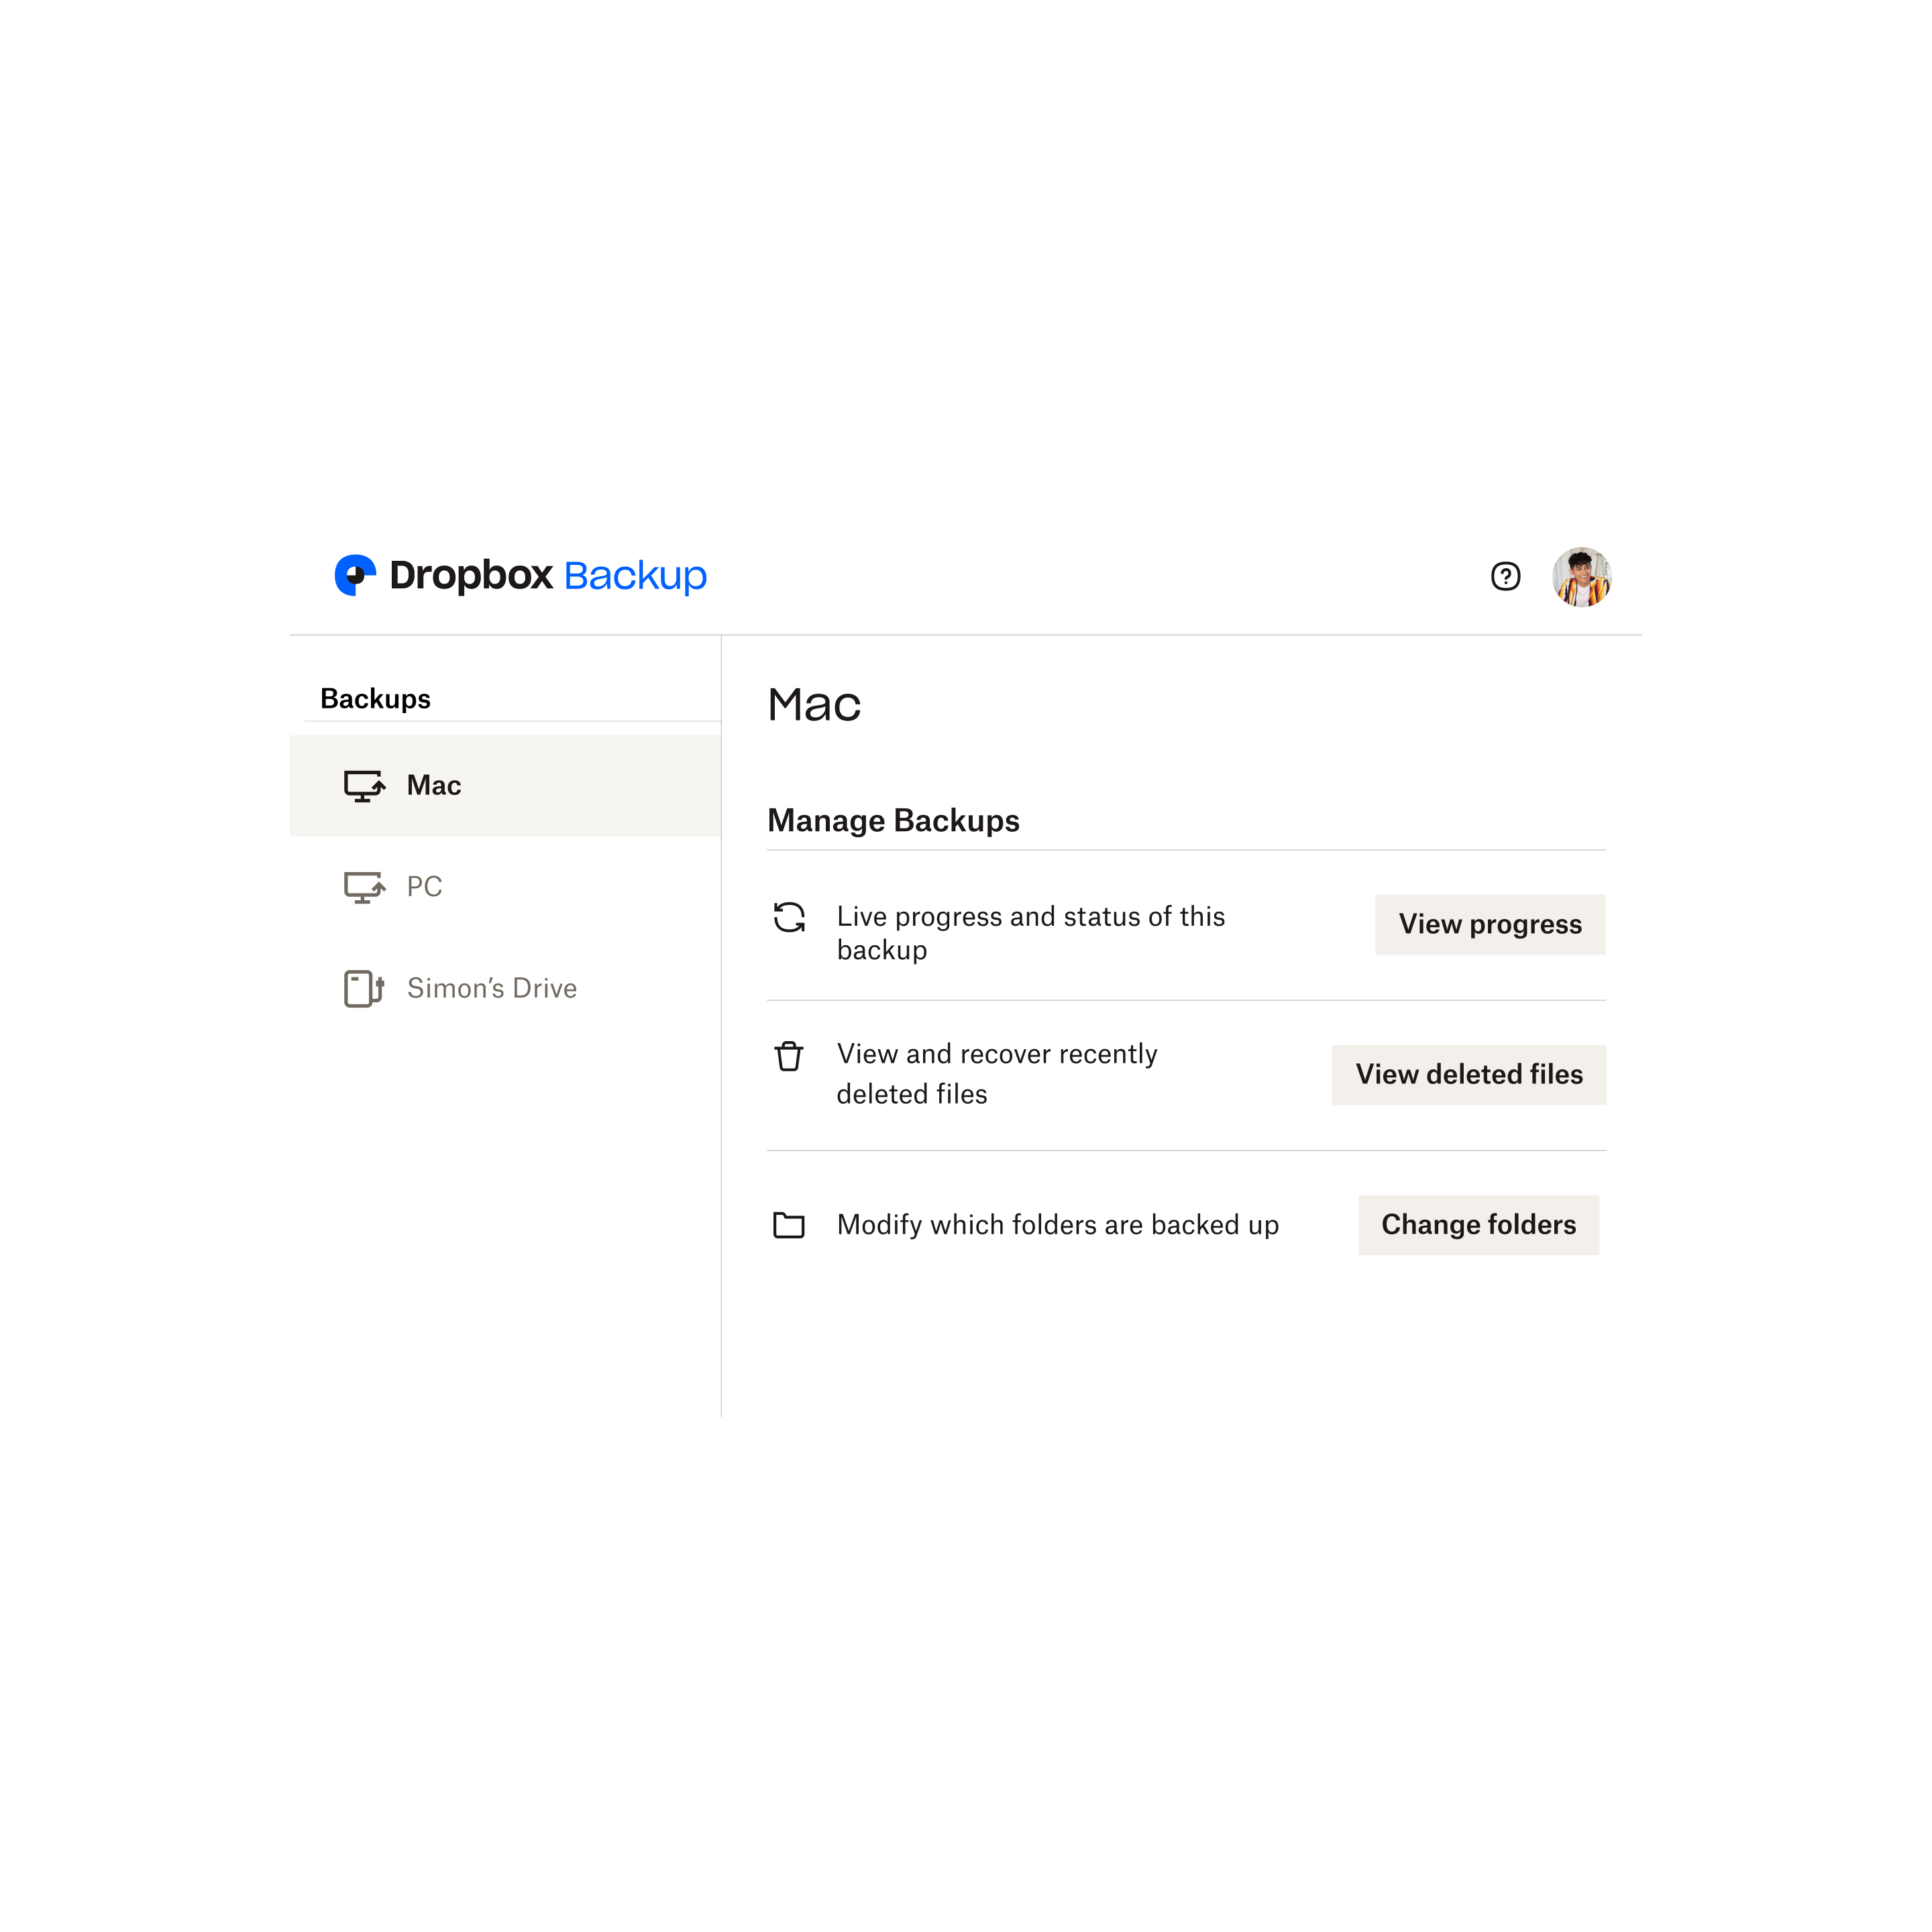 The menu for Dropbox Backup management that includes the ability to view backup status, view and recover deleted files, and to change which folders are backed up